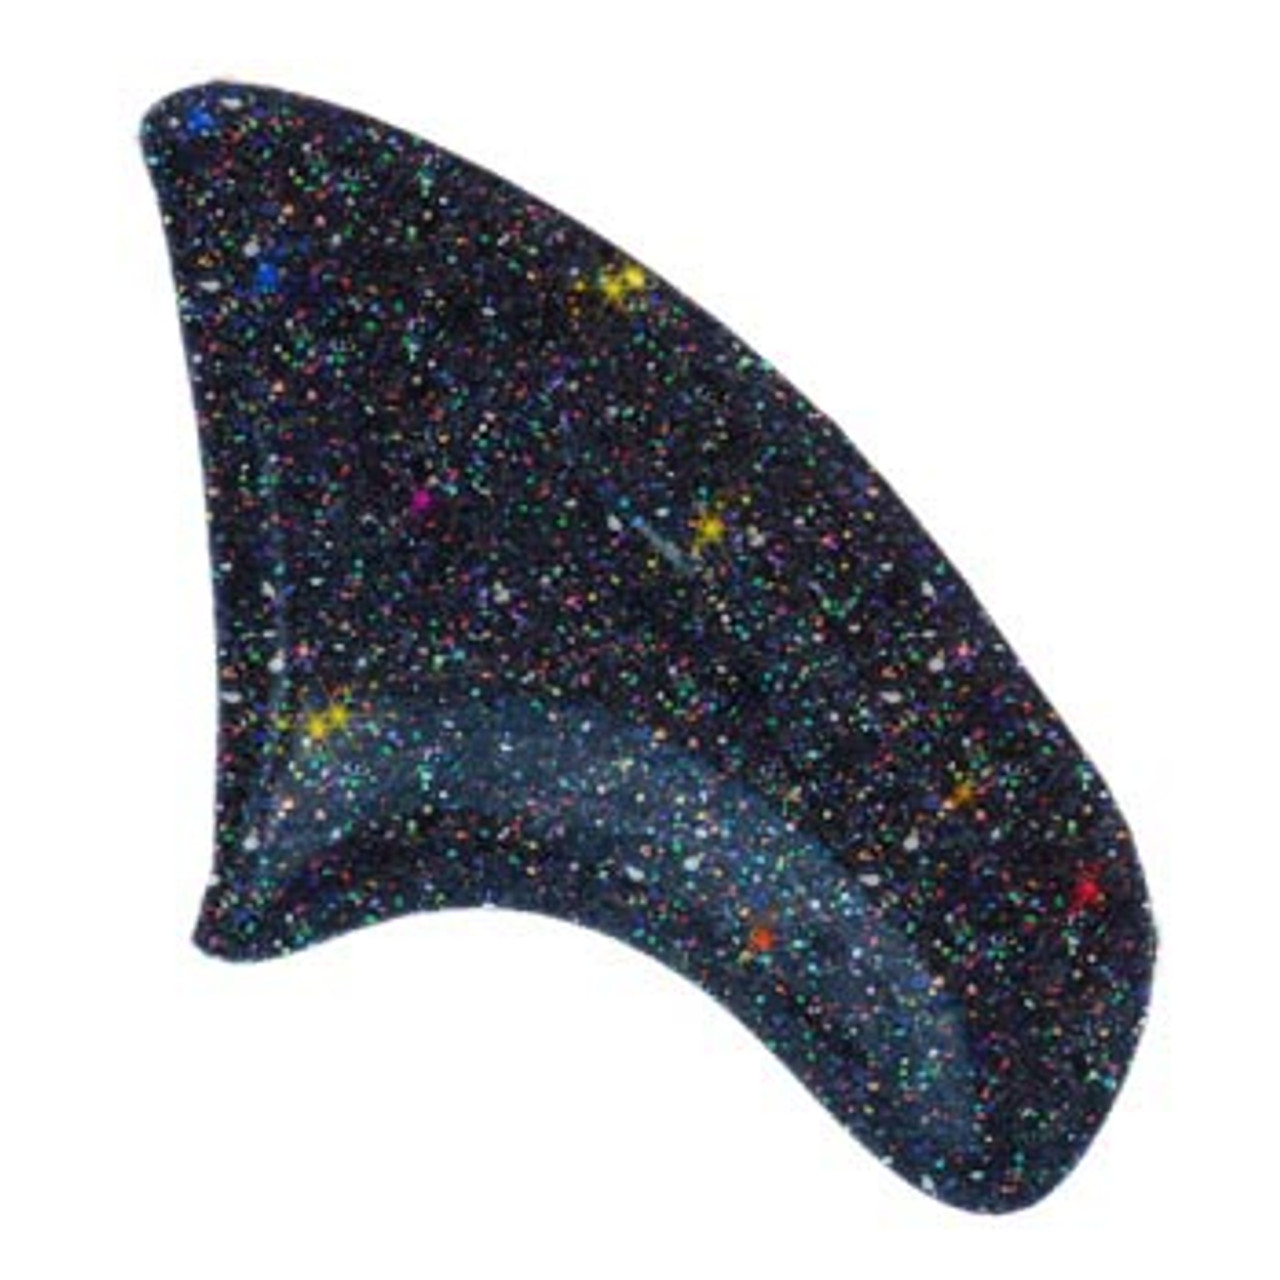 Purrdy Paws Soft Nail Caps for Cat Claws - Blue Glitter